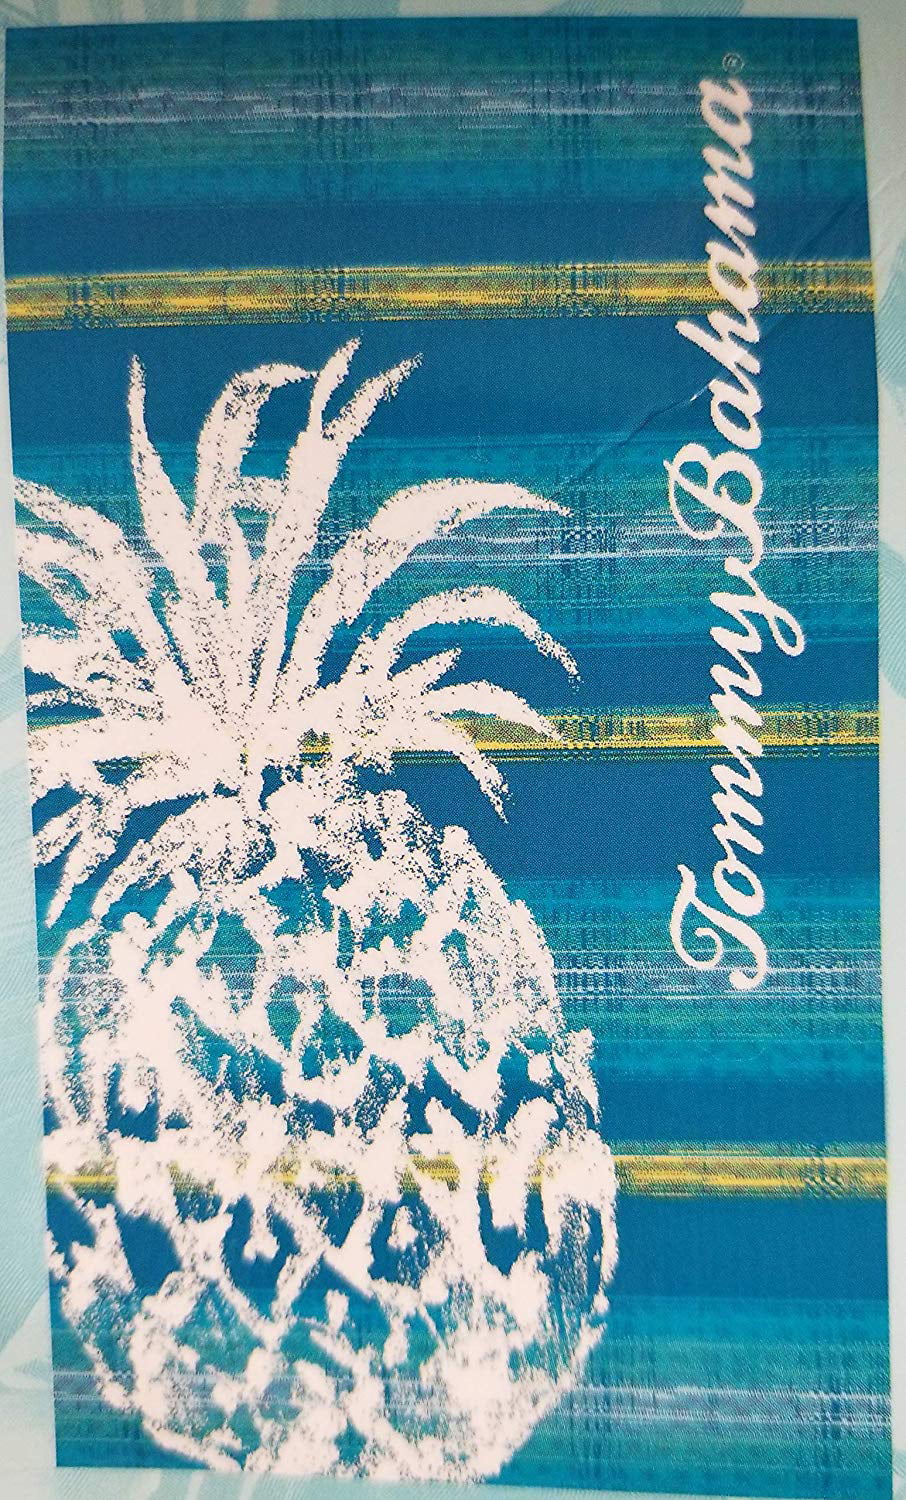 Tommy Bahama Beach Towel Pineapple 40 x 70 inches 100% Cotton NEW Pool Bath